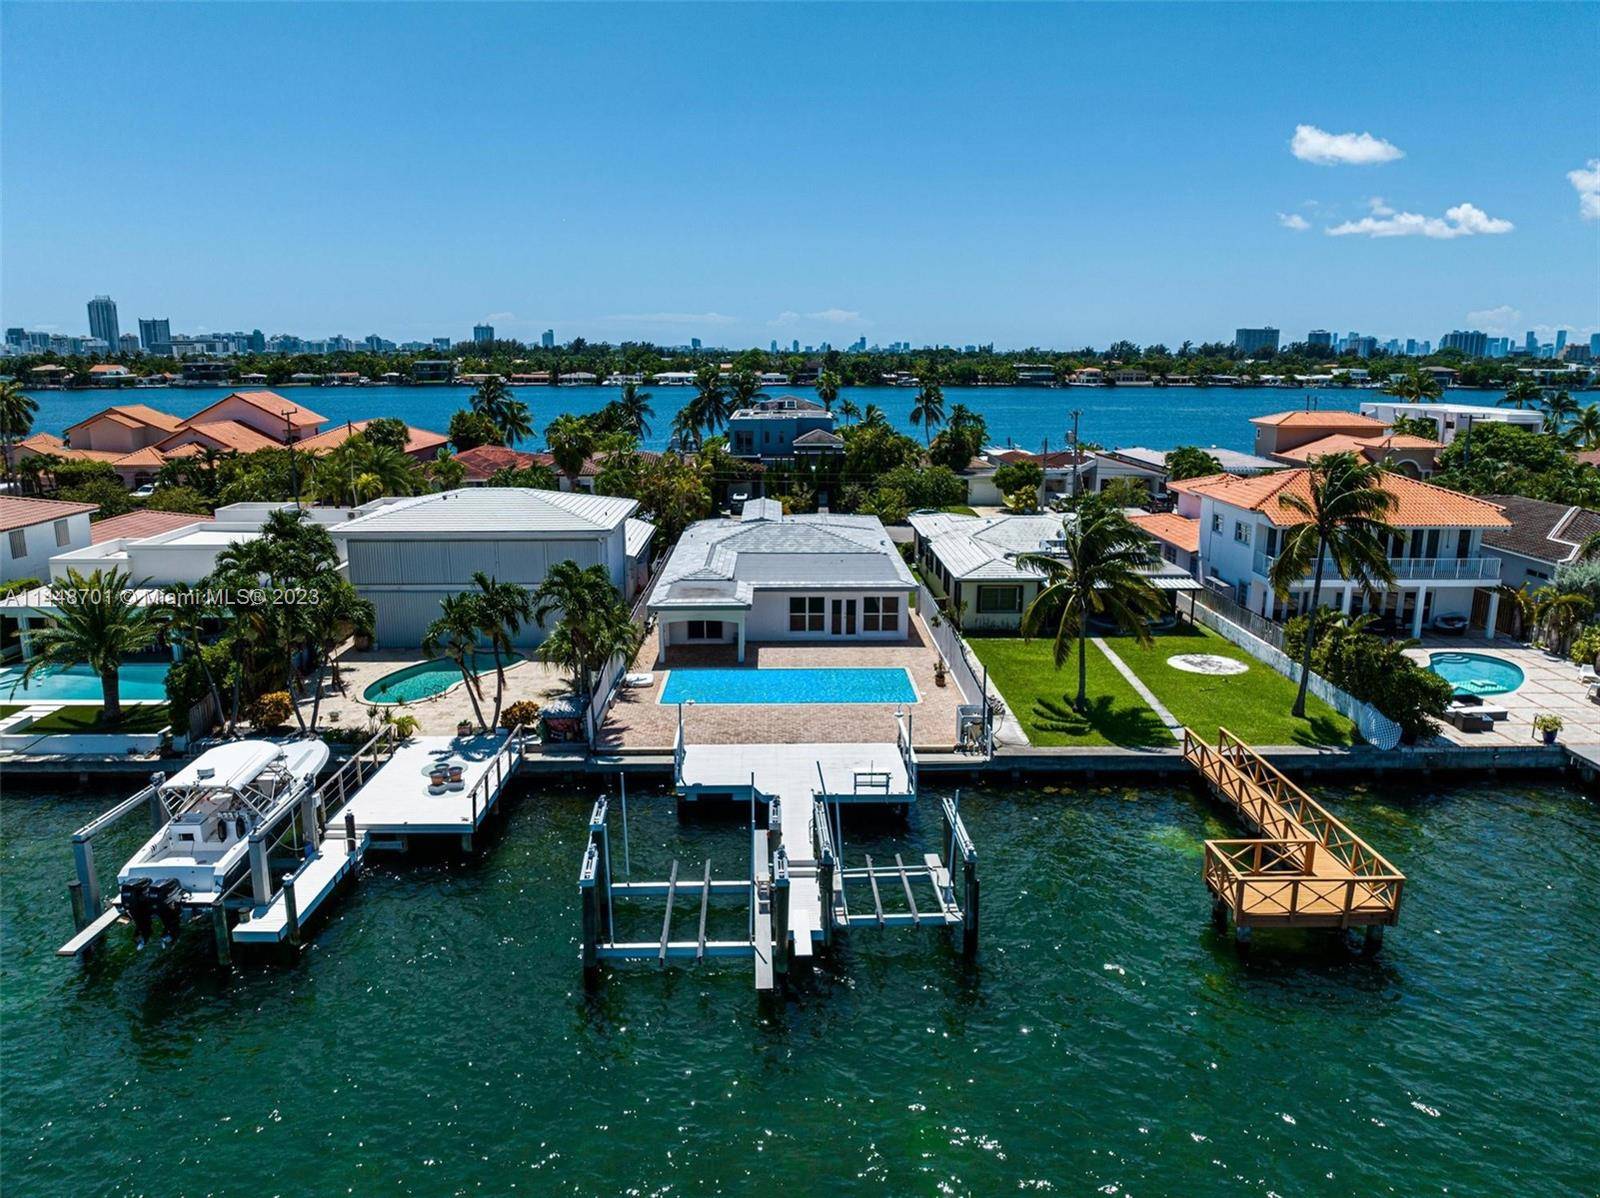 Available now this is your opportunity to rent this renovated, waterfront home with spectacular and expansive views of the Indian Creek mansions and Biscayne Bay.